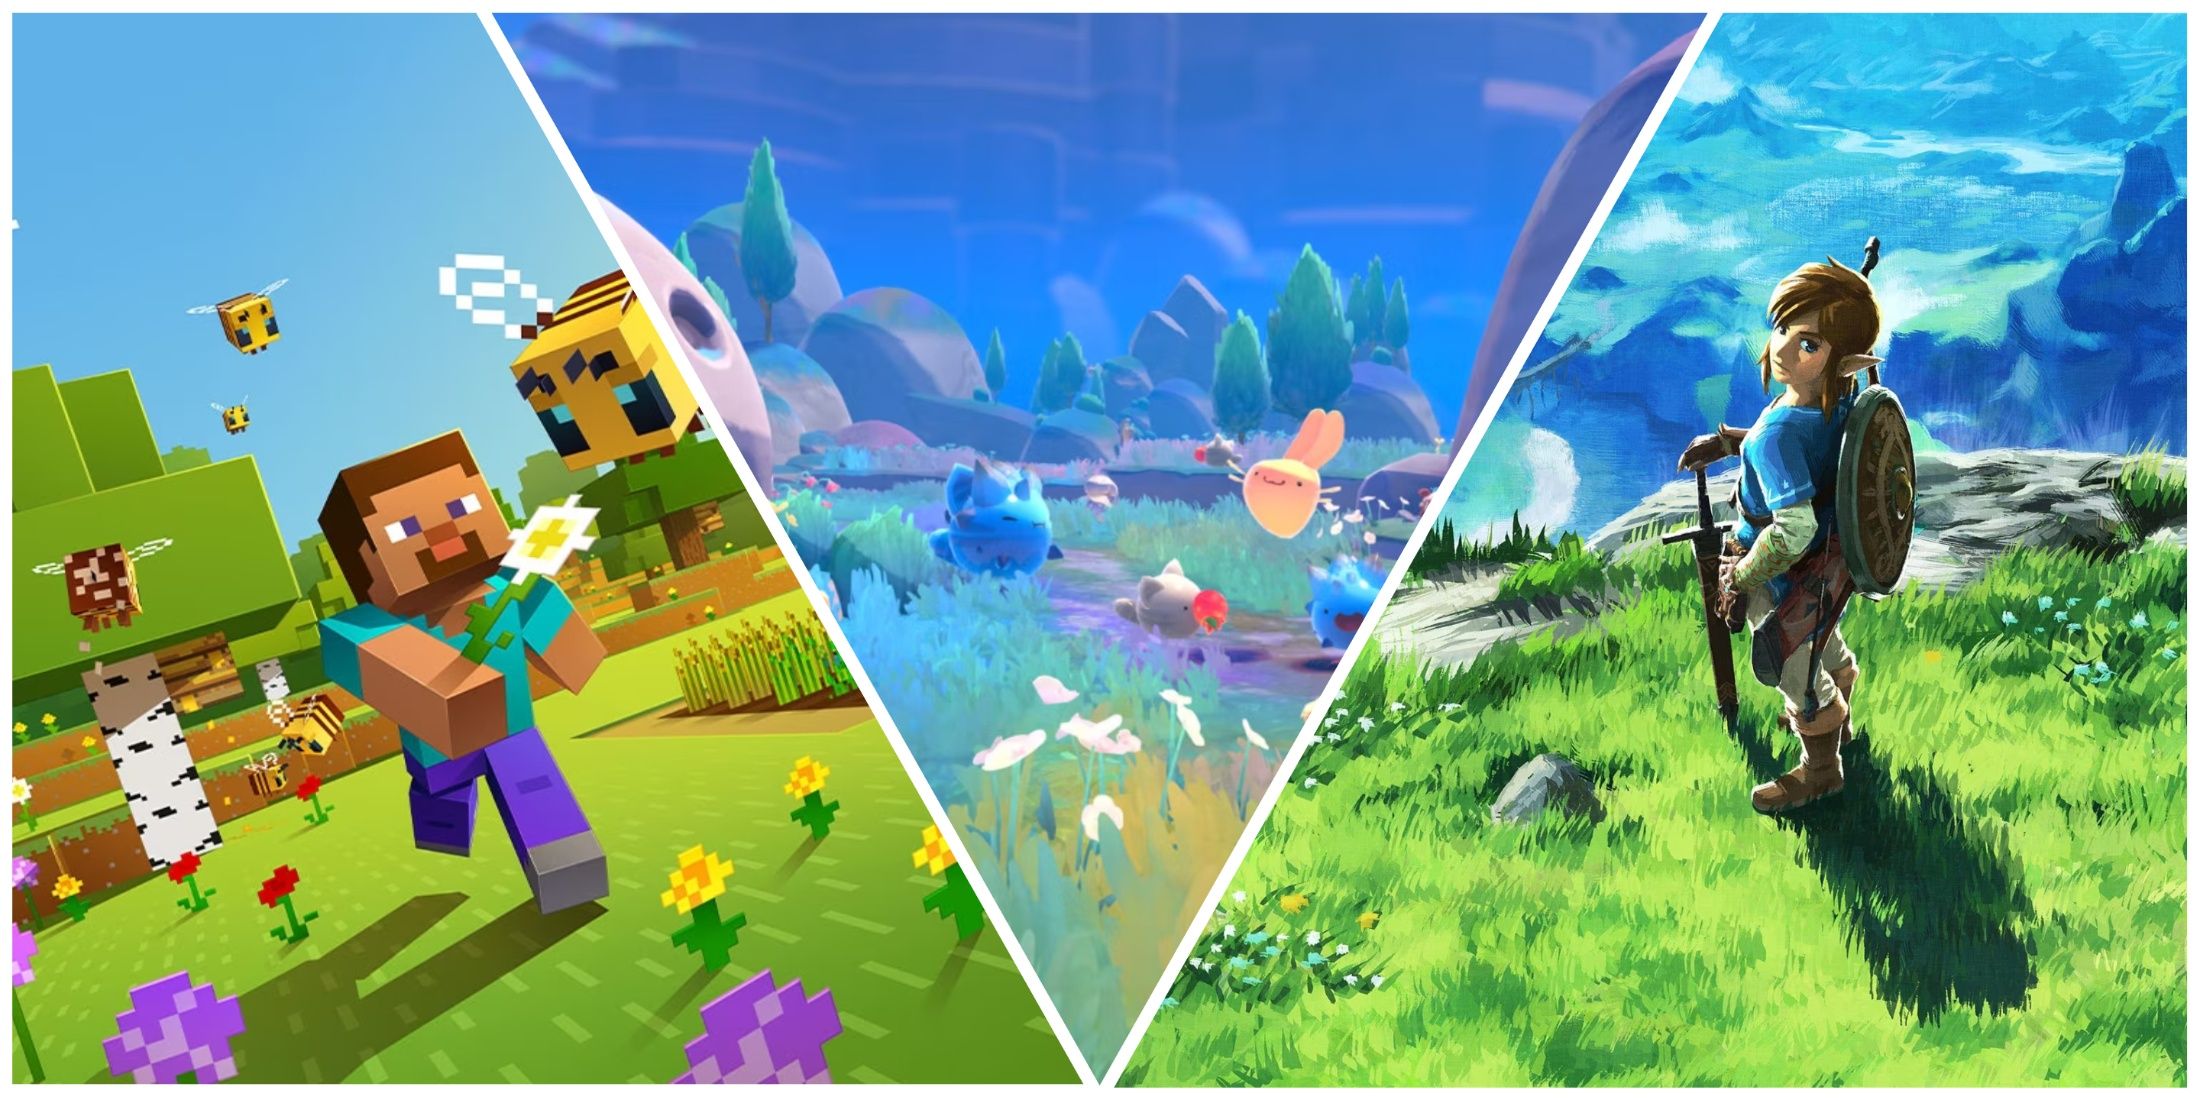 Collage featuring Minecraft (left), Slime Rancher (center), and Breath of the Wild (right)